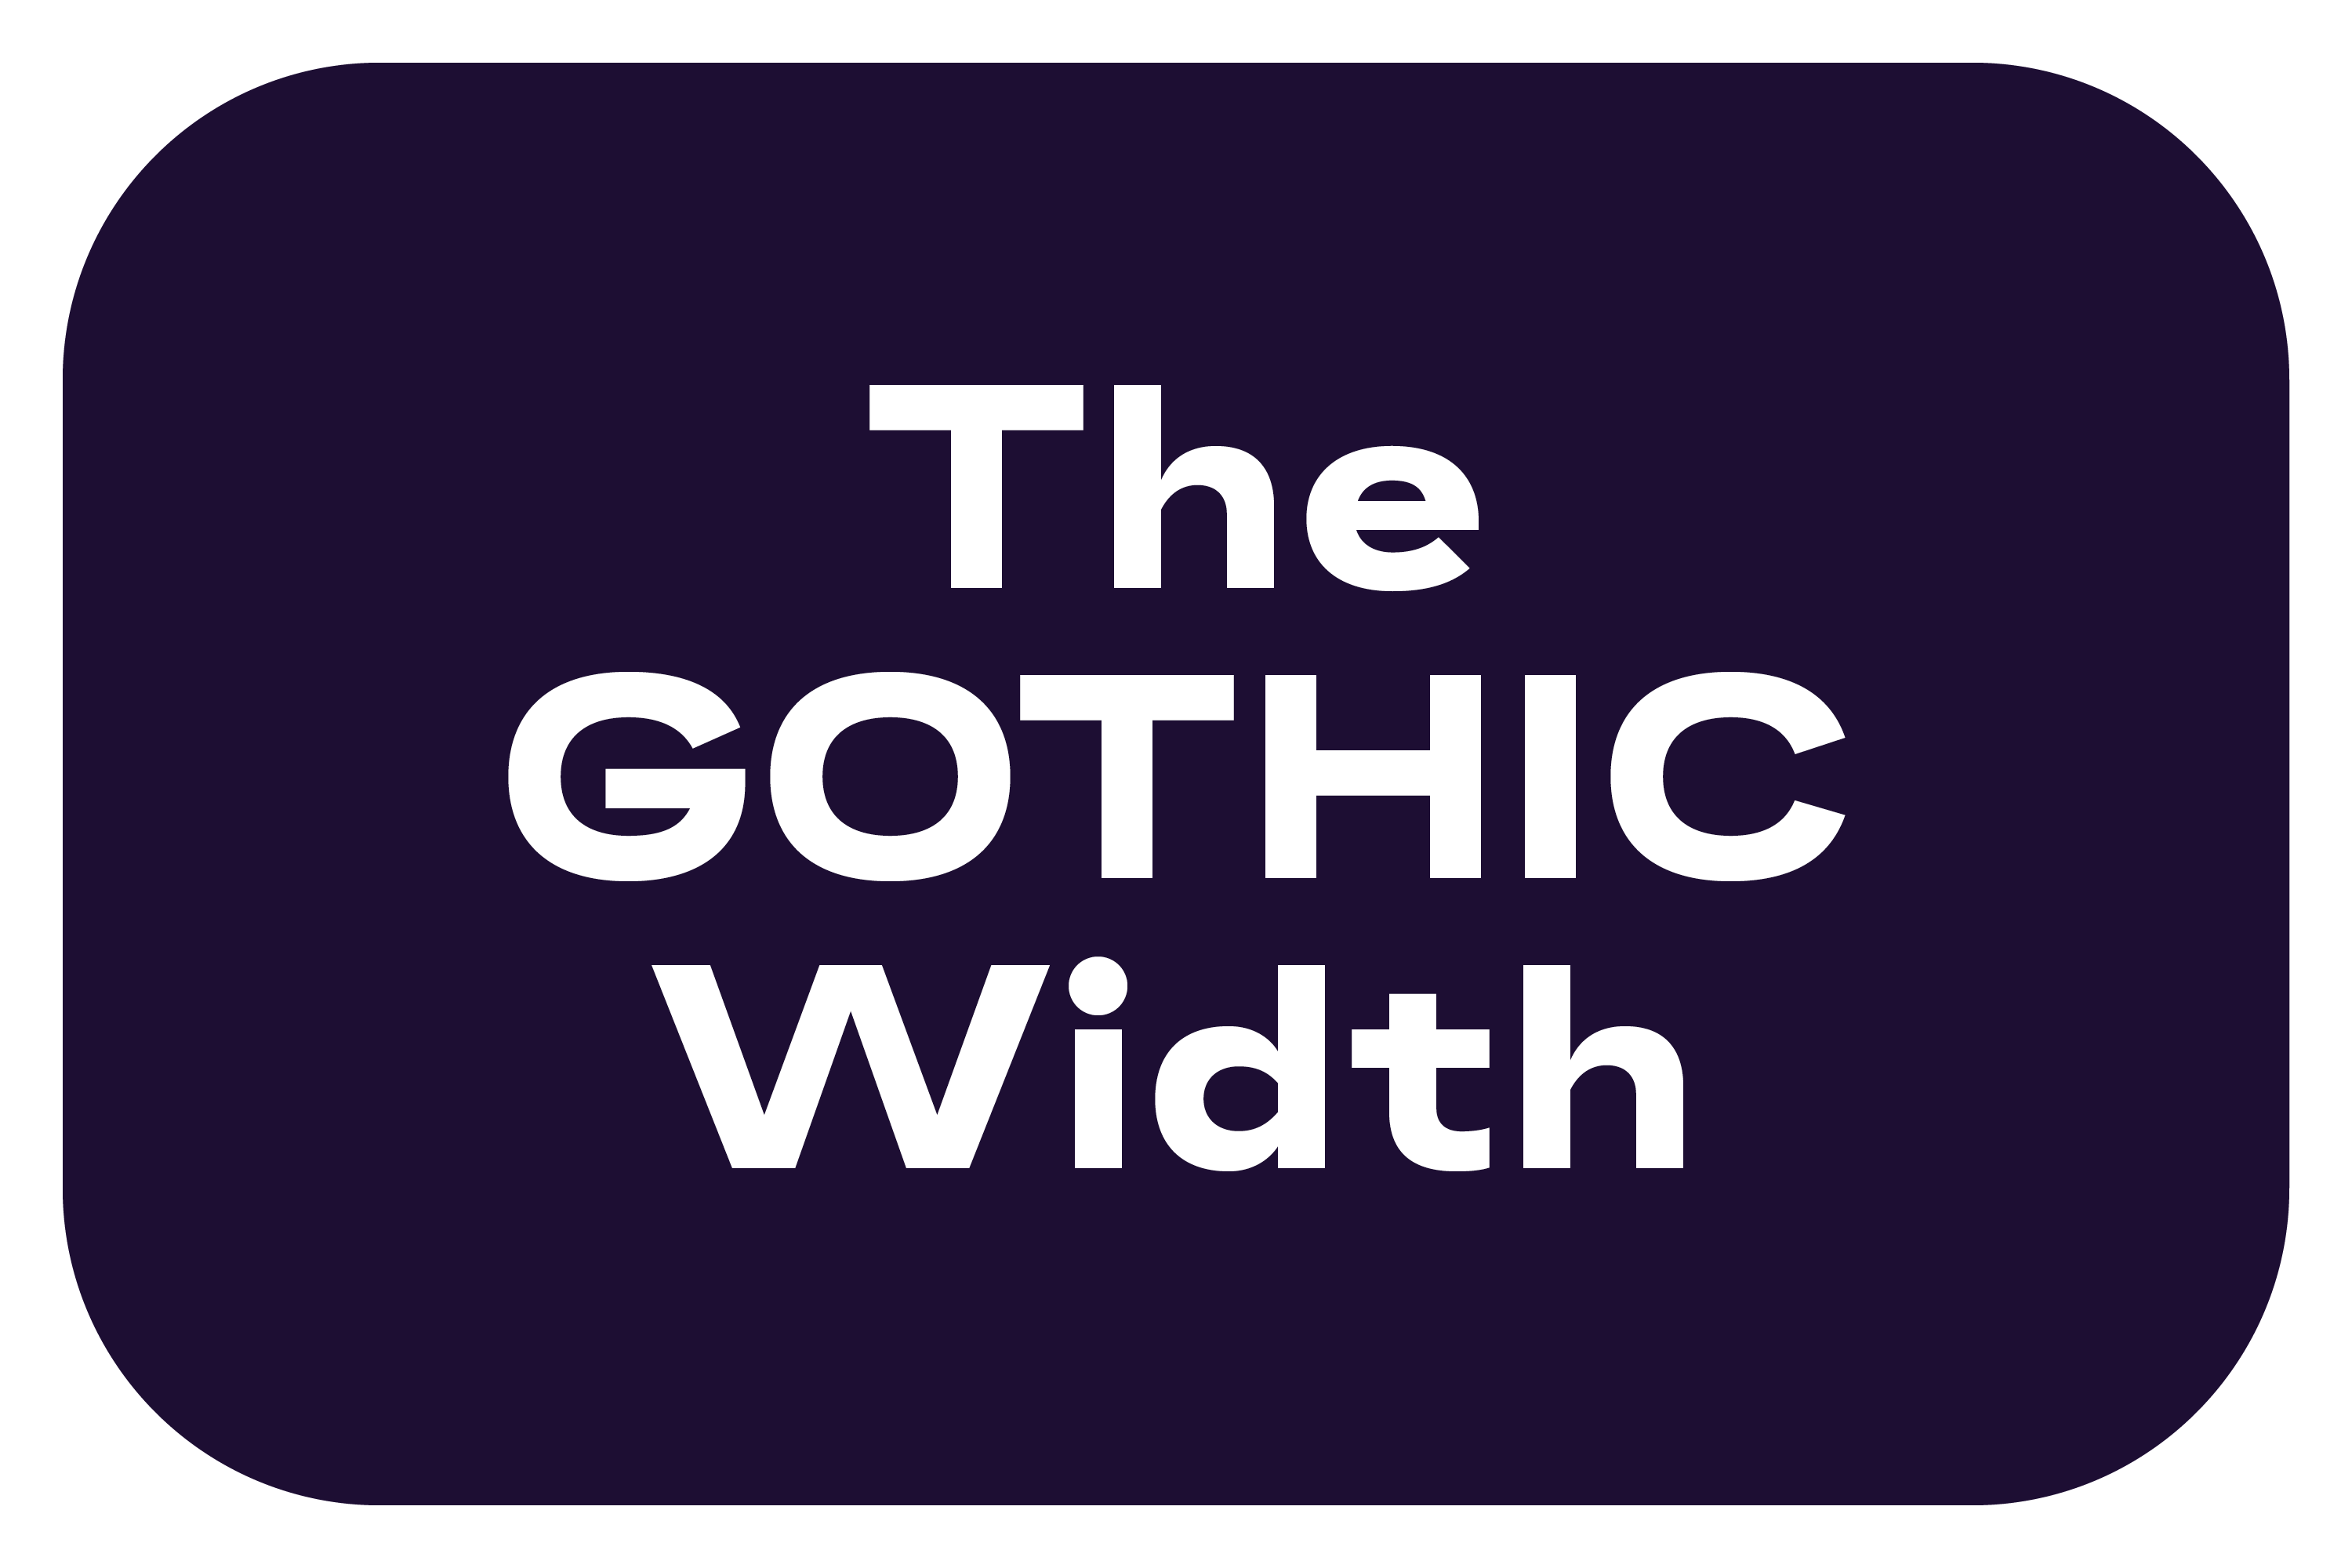 The GOTHIC Width